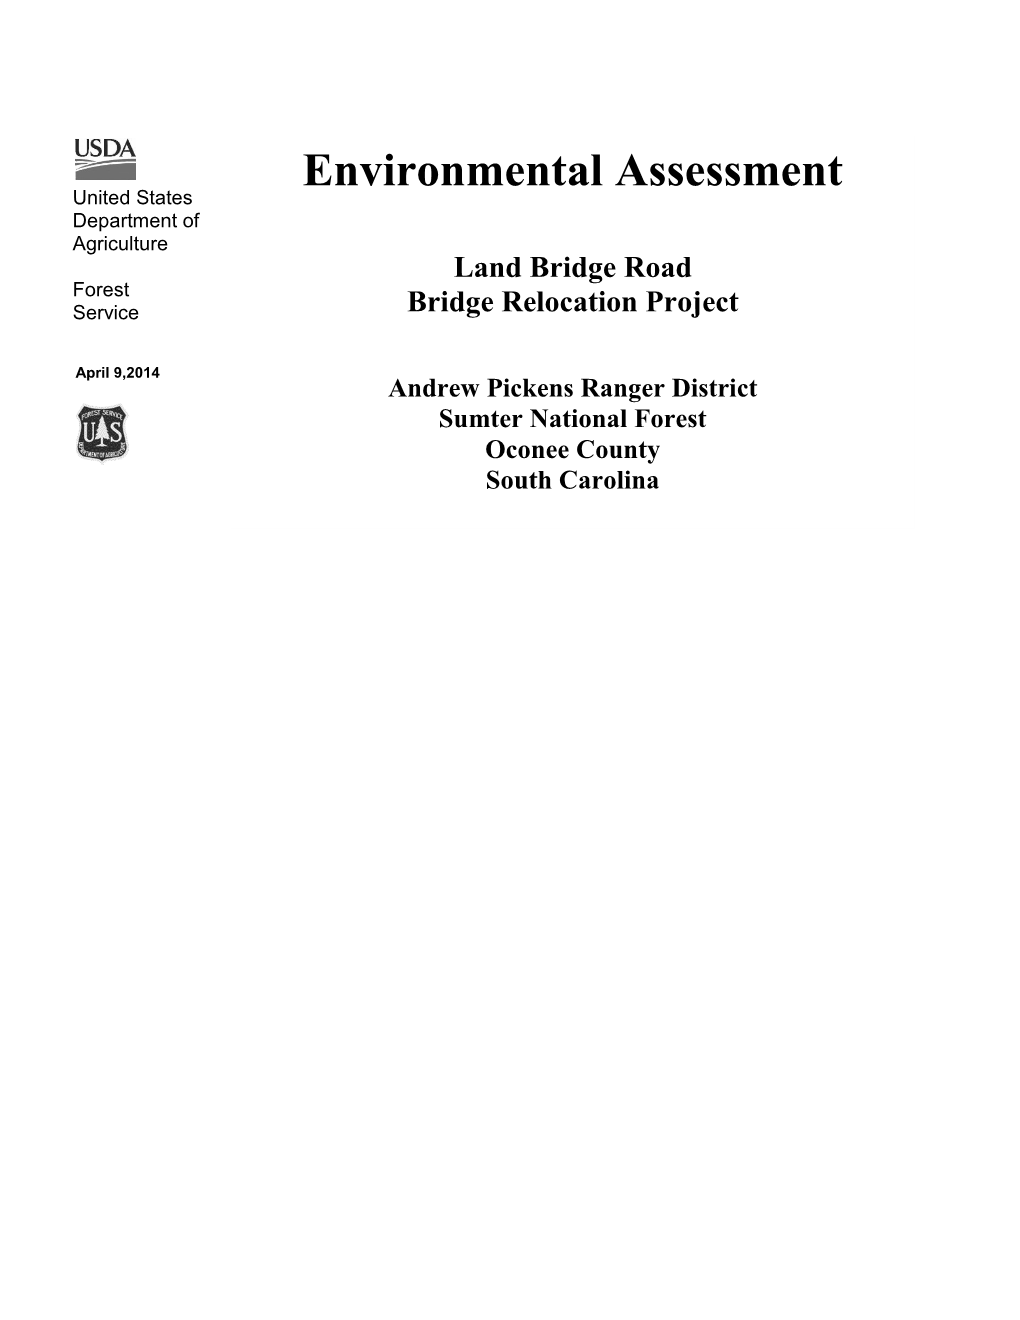 Environmental Assessment United States Department of Agriculture Land Bridge Road Forest Service Bridge Relocation Project